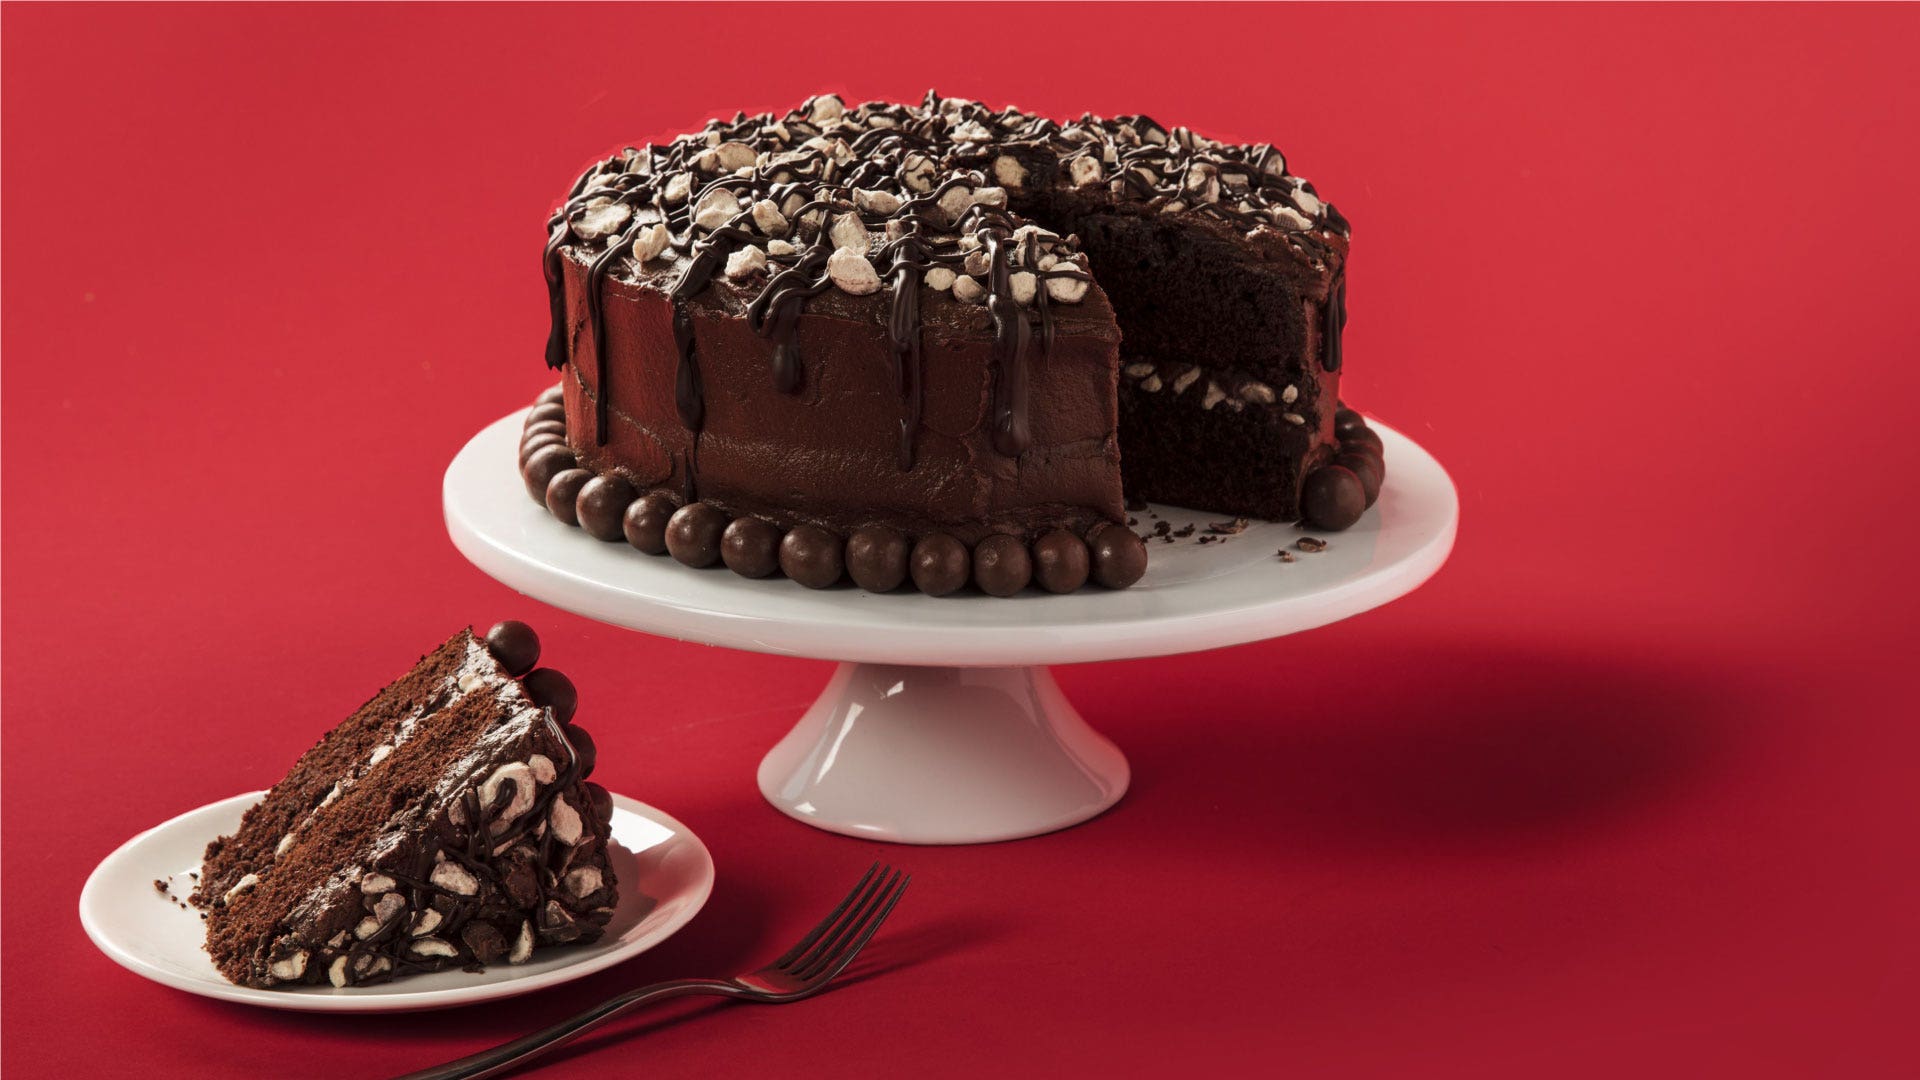 Image of Old Fashioned Malted Chocolate Cake